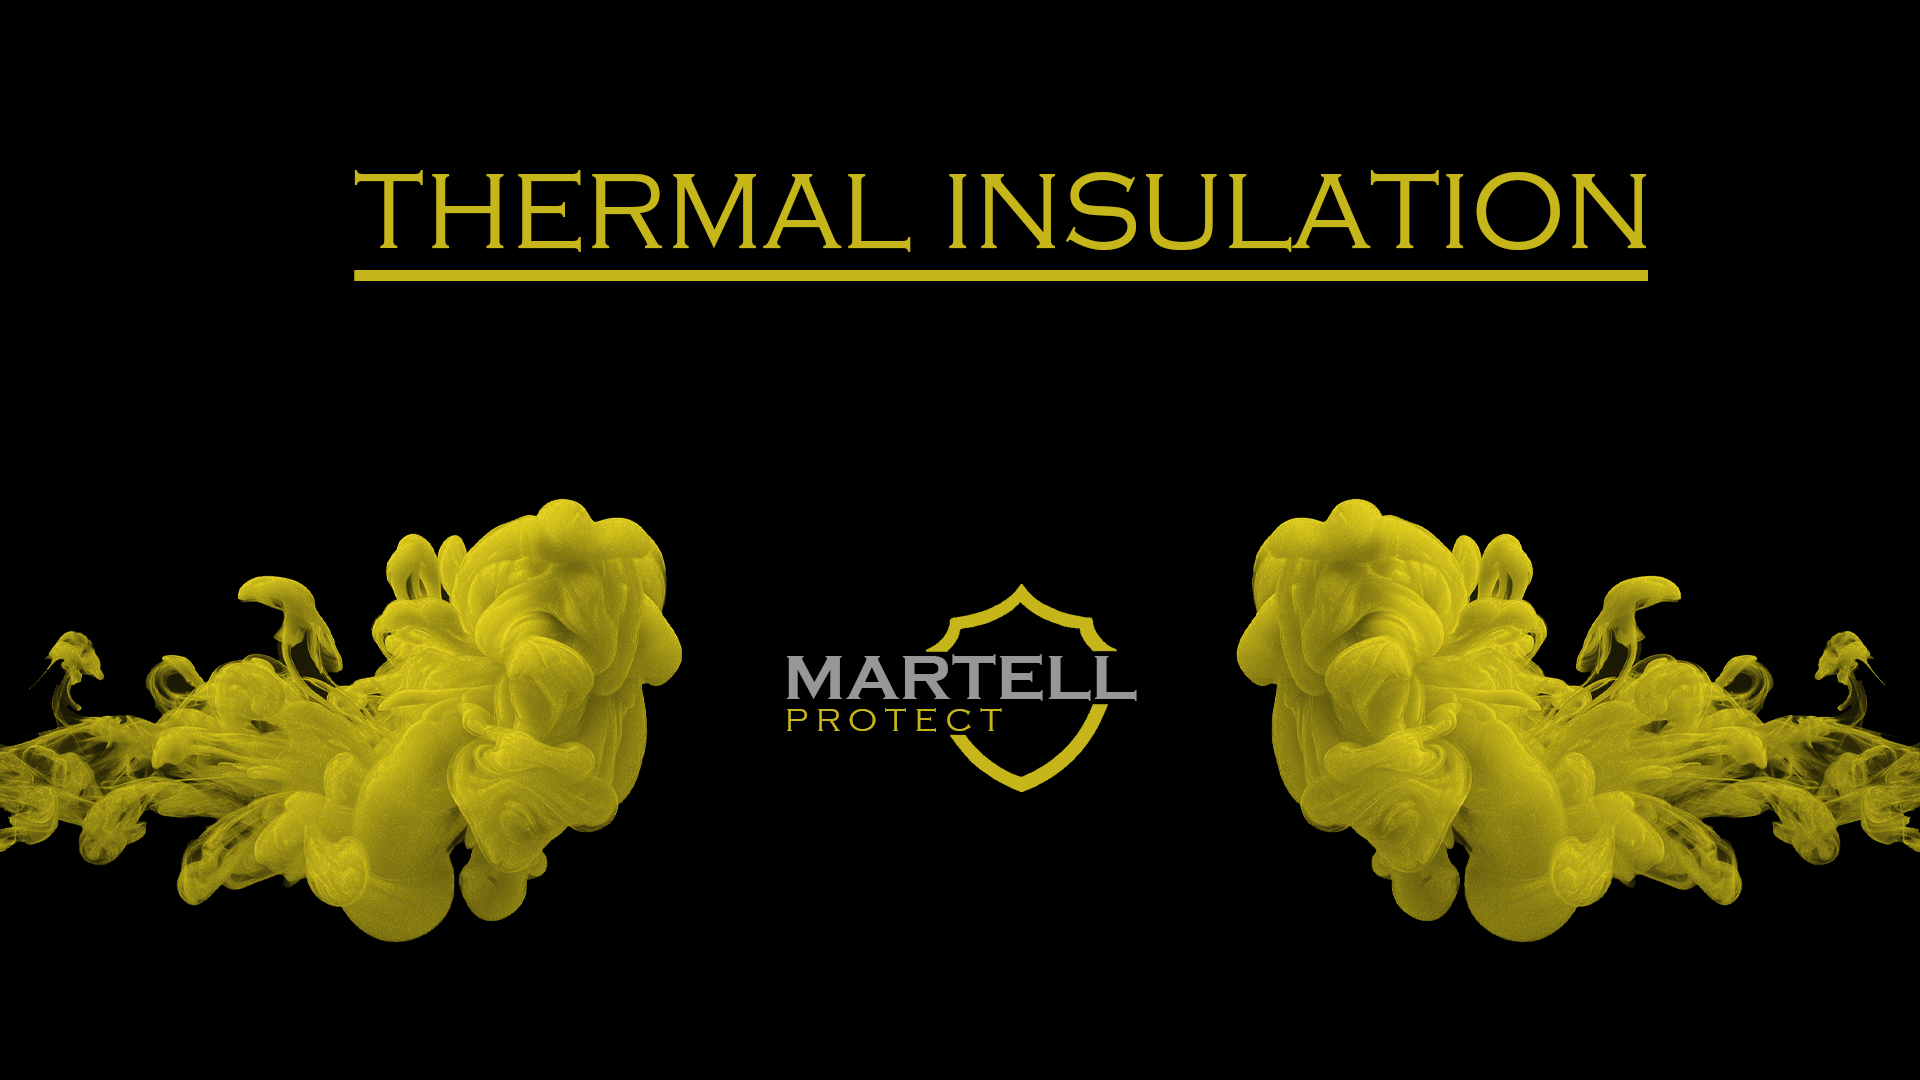 MARTELL PROTECT THERMAL INSULATION – RUBANS ÉLASTIQUES AVEC ISOLATION THERMIQUE